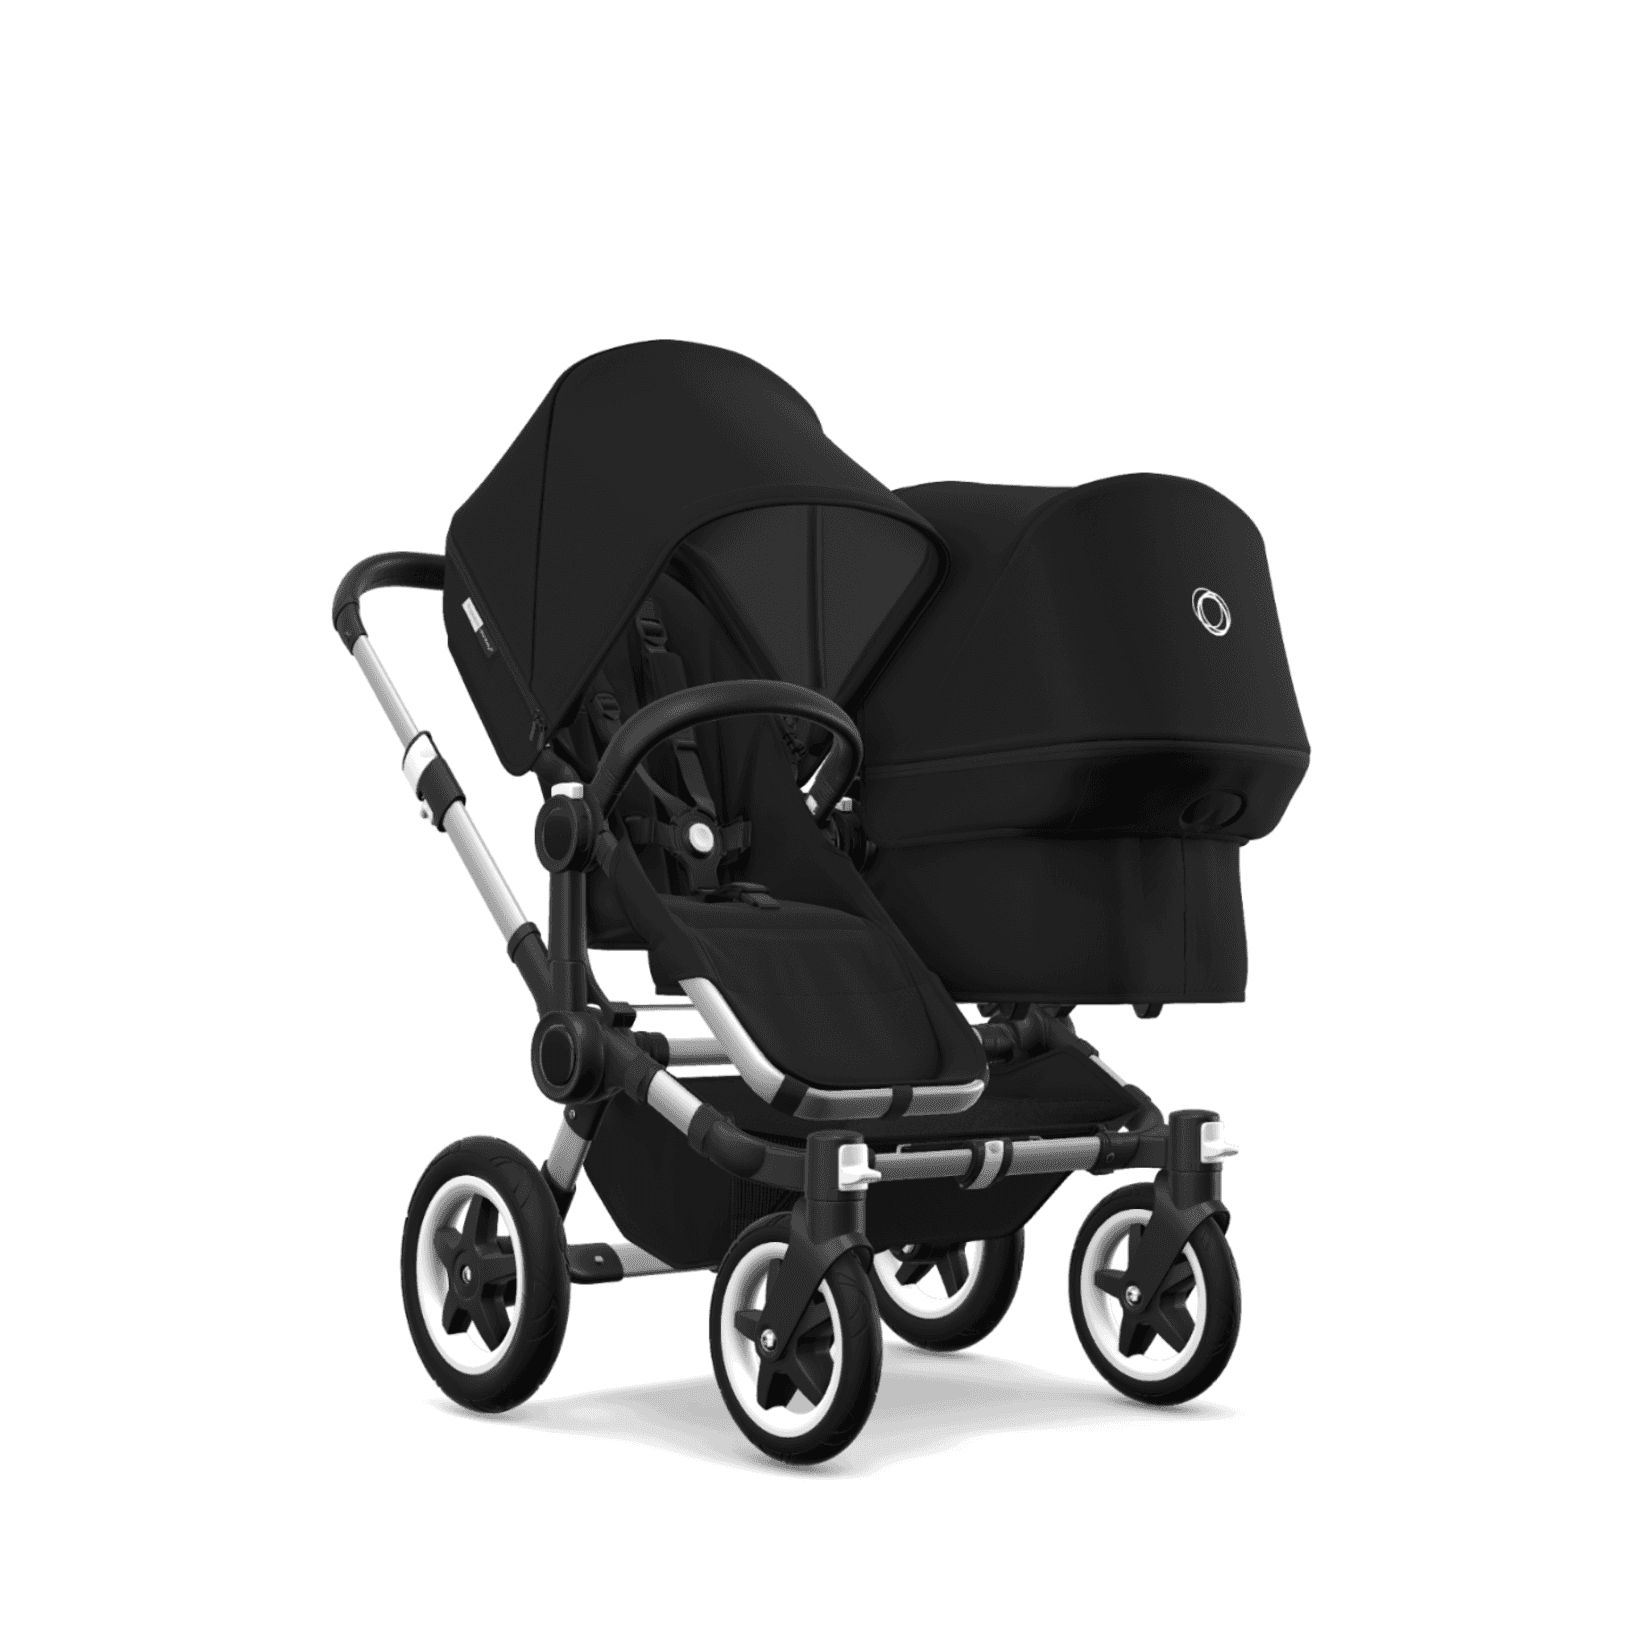 Bugaboo range available for hire